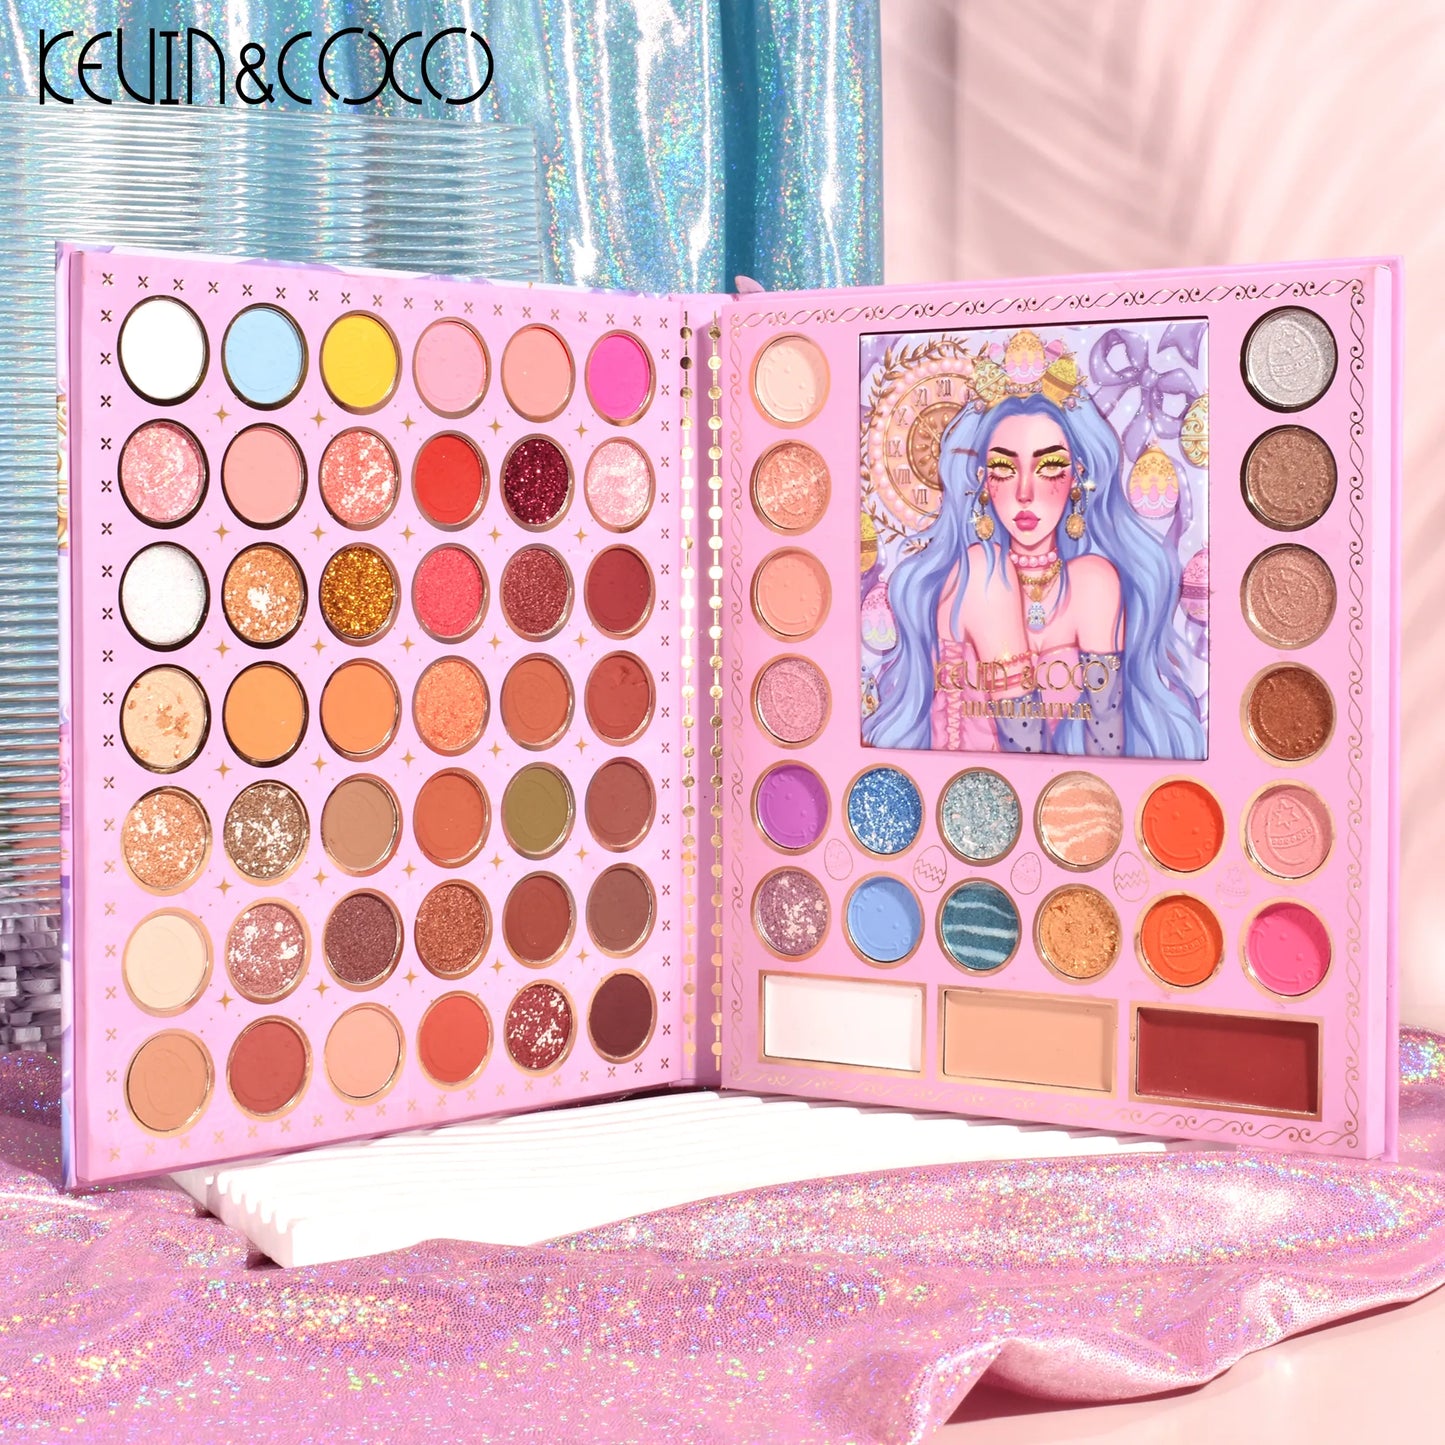 KEVIN&COCO EASTER EGGS 69 COLOR EYESHADOW / FACE PALETTE KC223588 R6